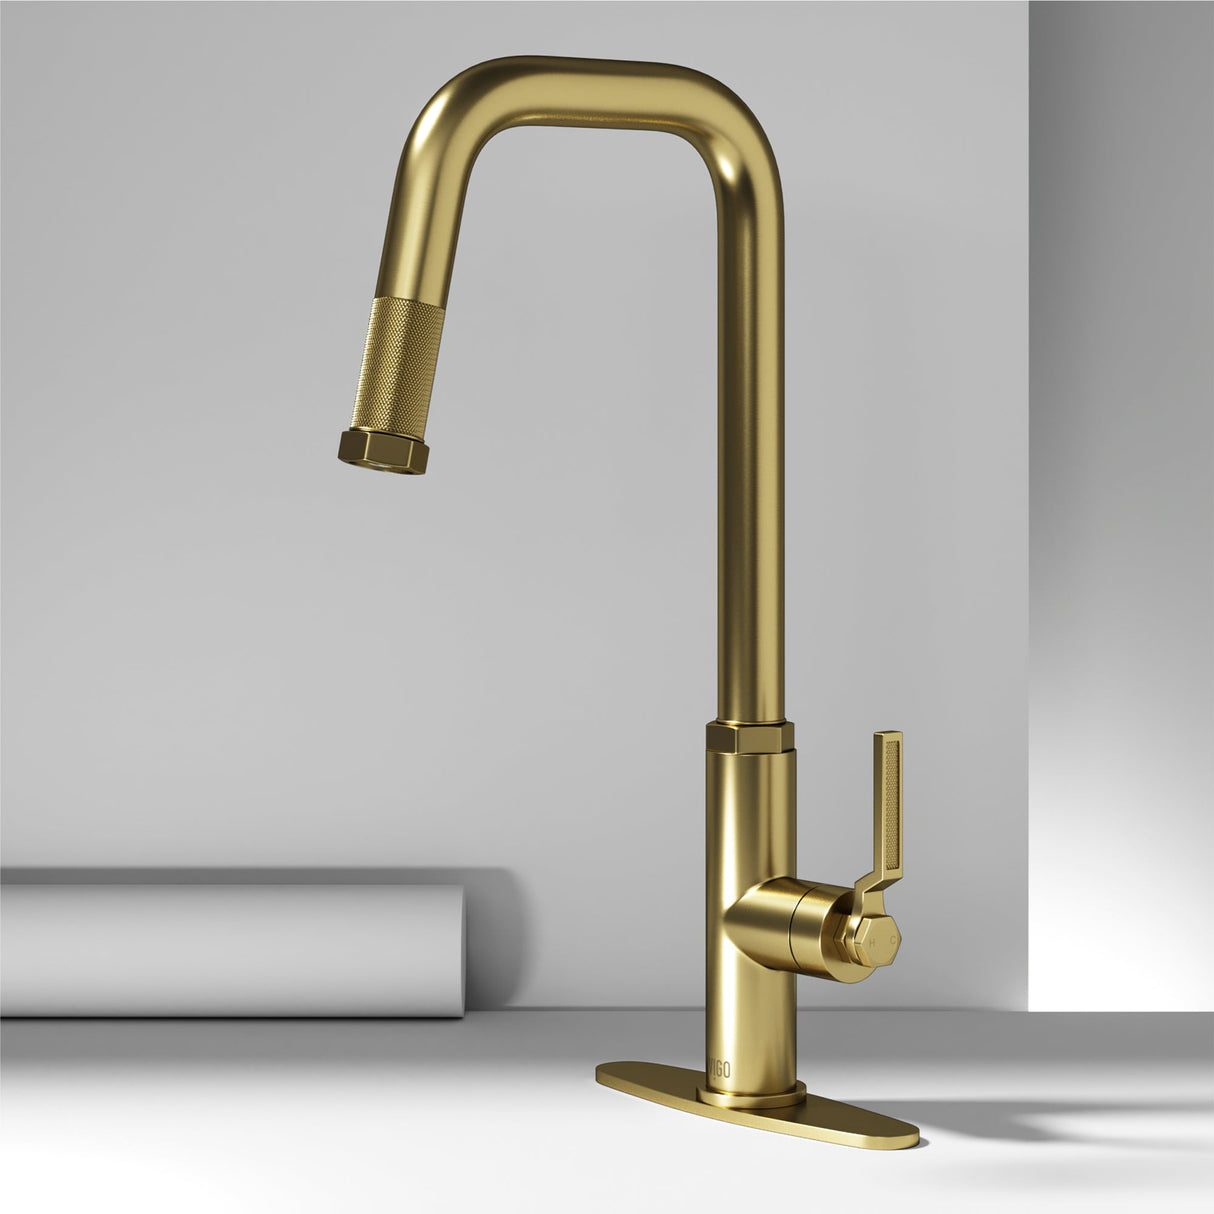 VIGO Hart Angular Kitchen Faucet with Deck Plate in Matte Brushed Gold VG02036MGK1